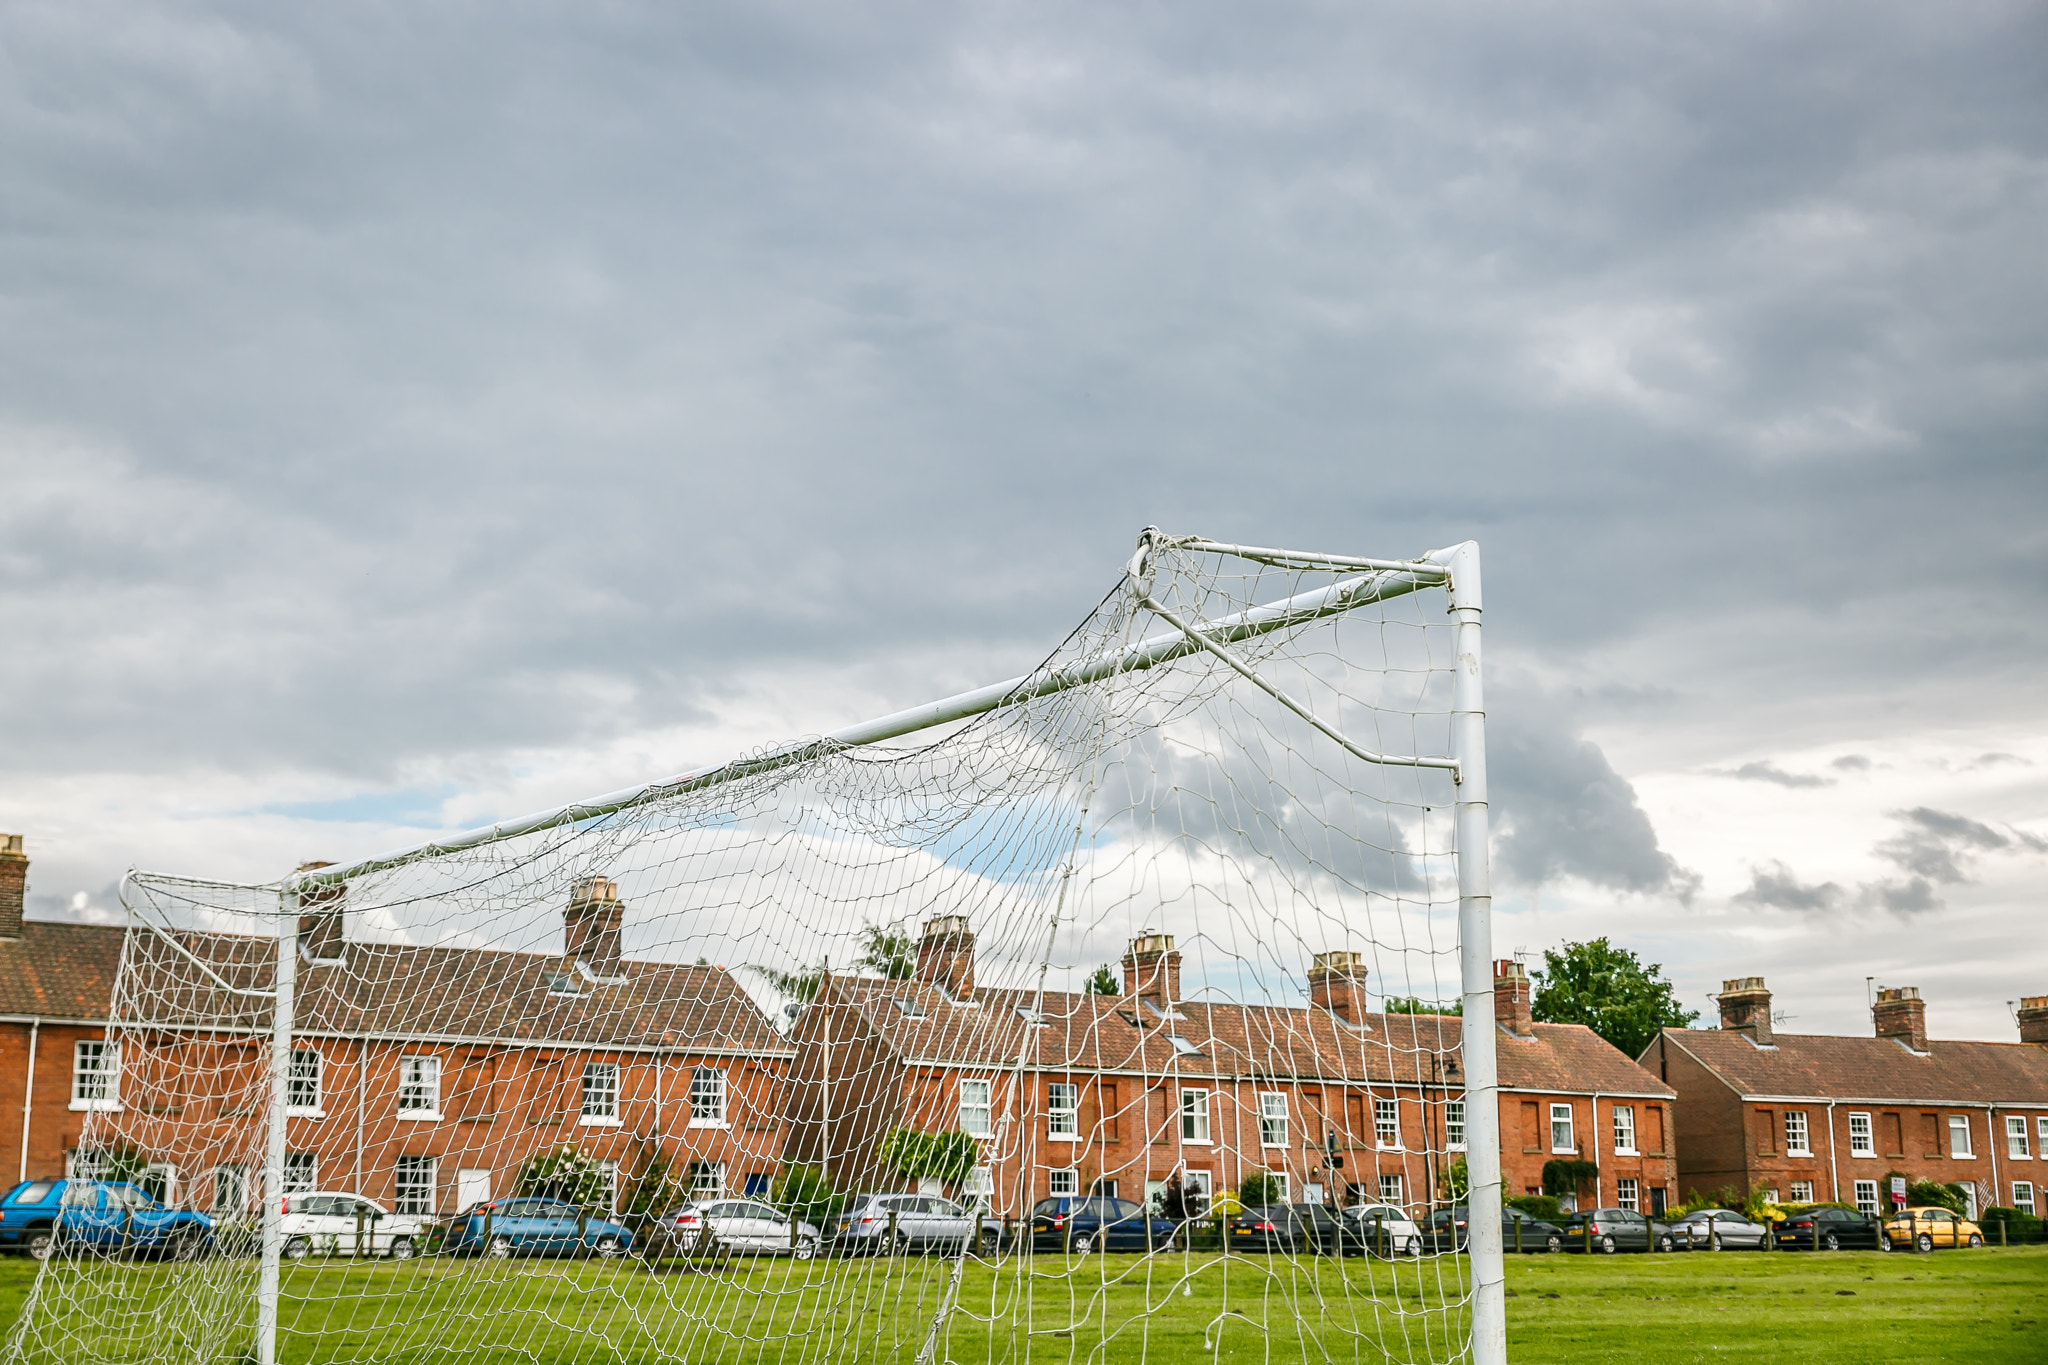 Great view of a football goal in a large park